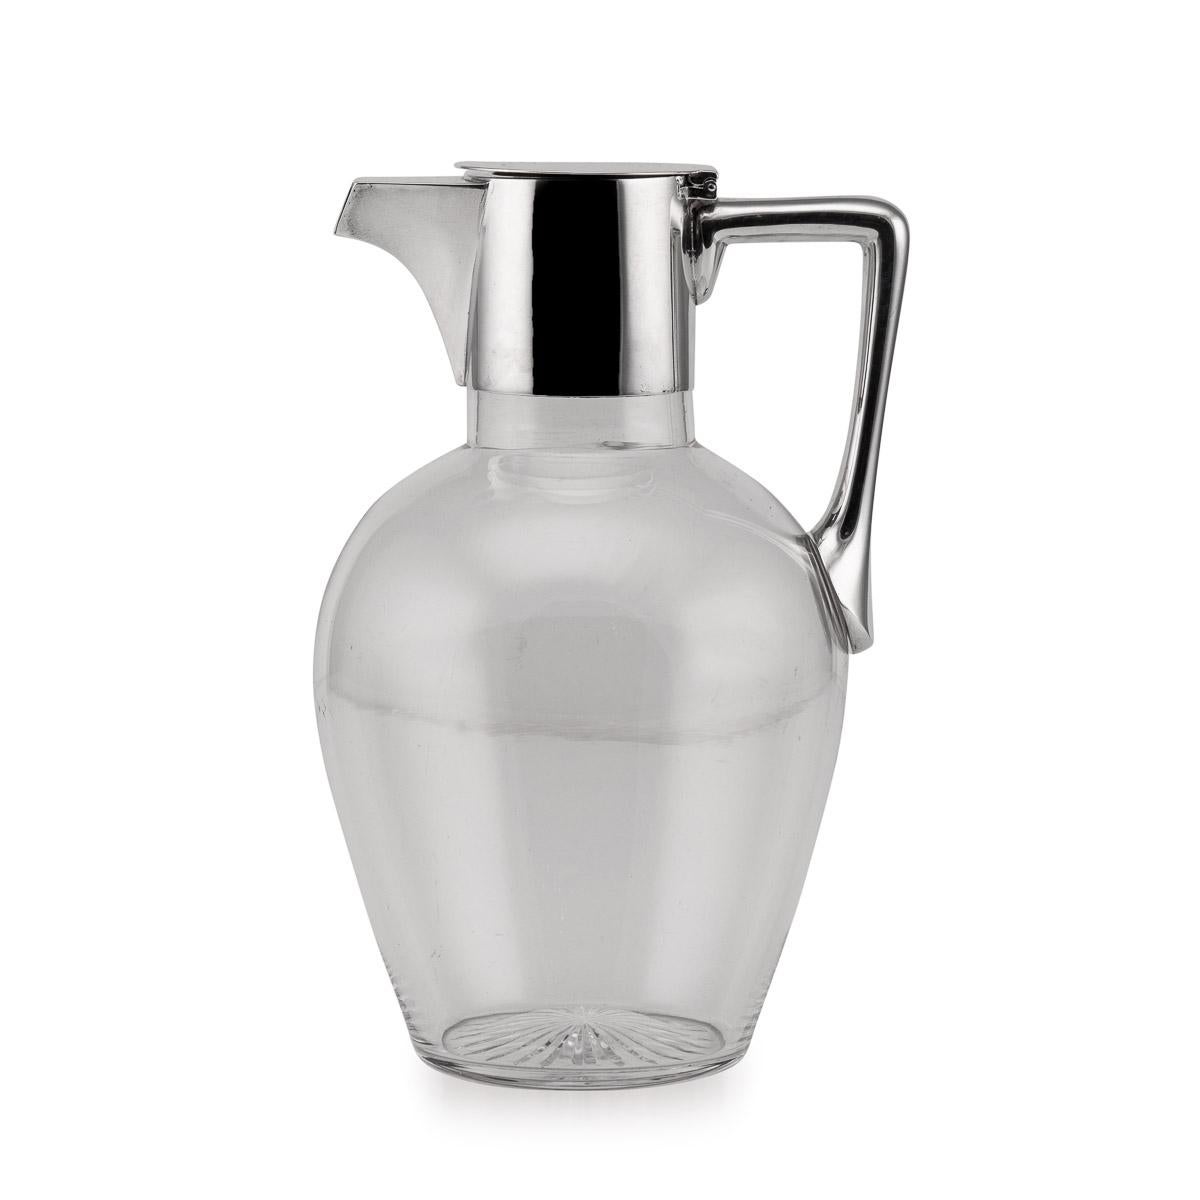 20th Century Edwardian silver & plain glass wine jug, the glass mounted with a plain solid silver collar and hinged lid.

Hallmarked English Silver, London, year 1902 (g), Maker JTH JHM (Hukin & Heath).

CONDITION
In great condition - no